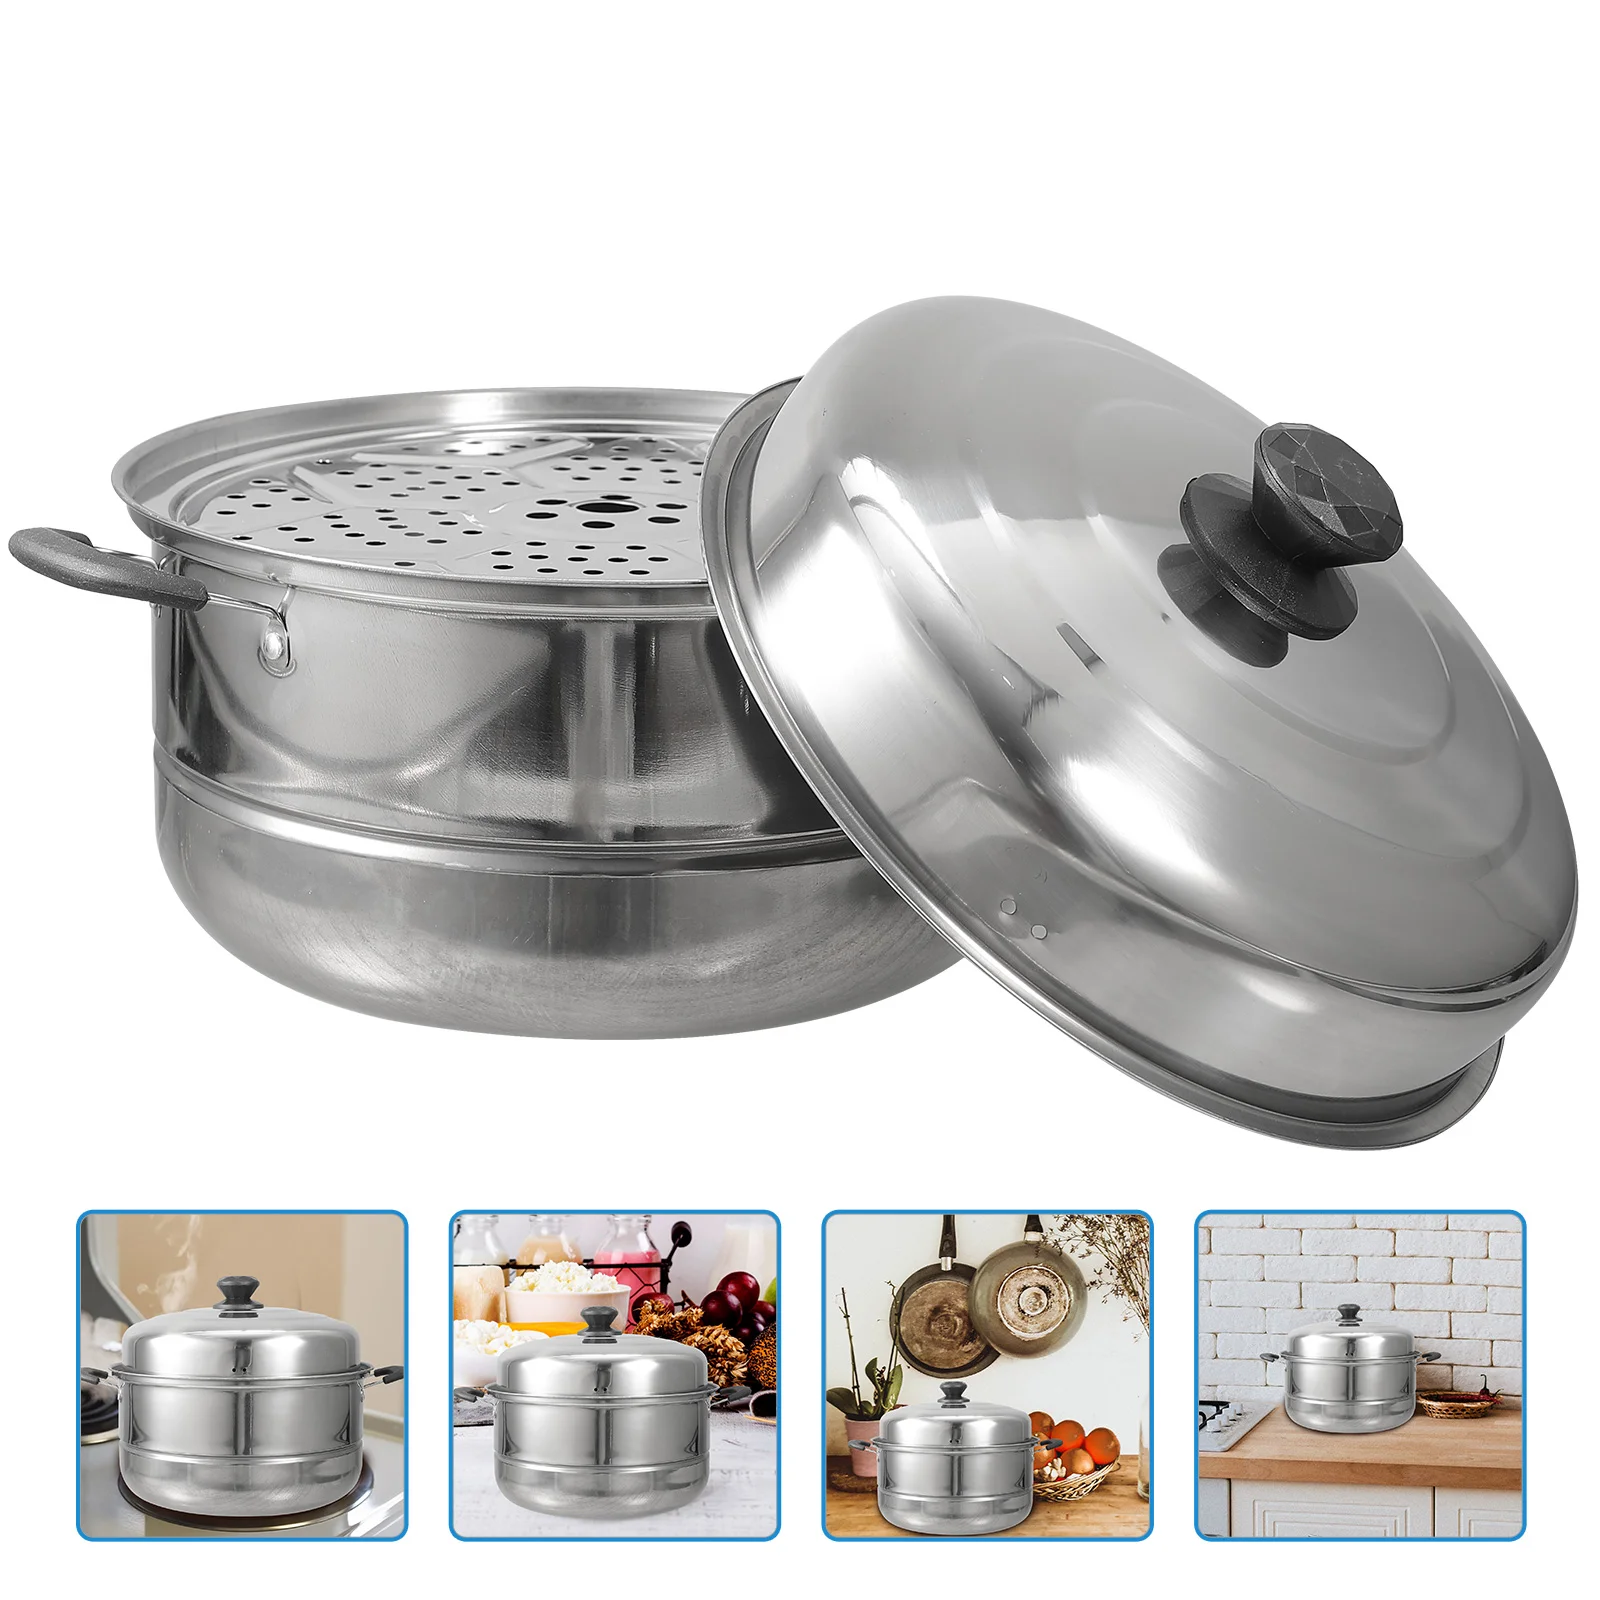 

Stainless Steel Steamer Double-layered Stockpot Kitchen Tools Food Metal Cooking Utensils Large Pots Hot